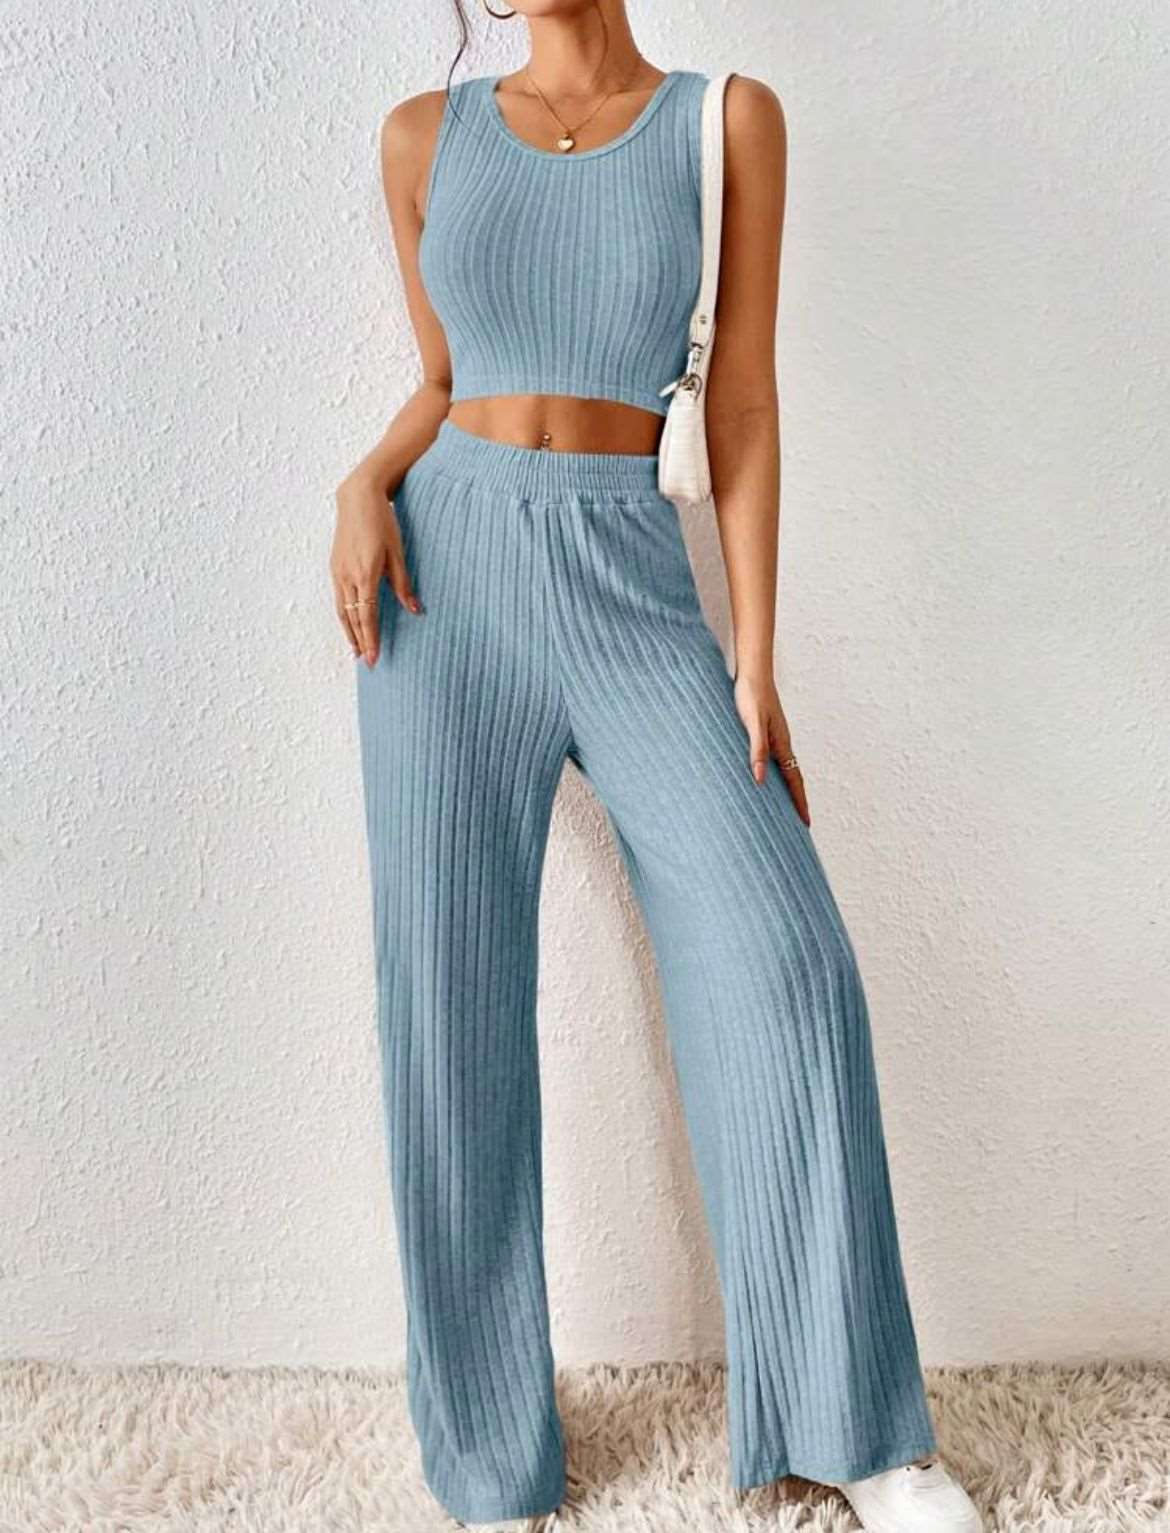 Women's Casual Knitted Top and High Waist Pants Two-piece Outfit Set